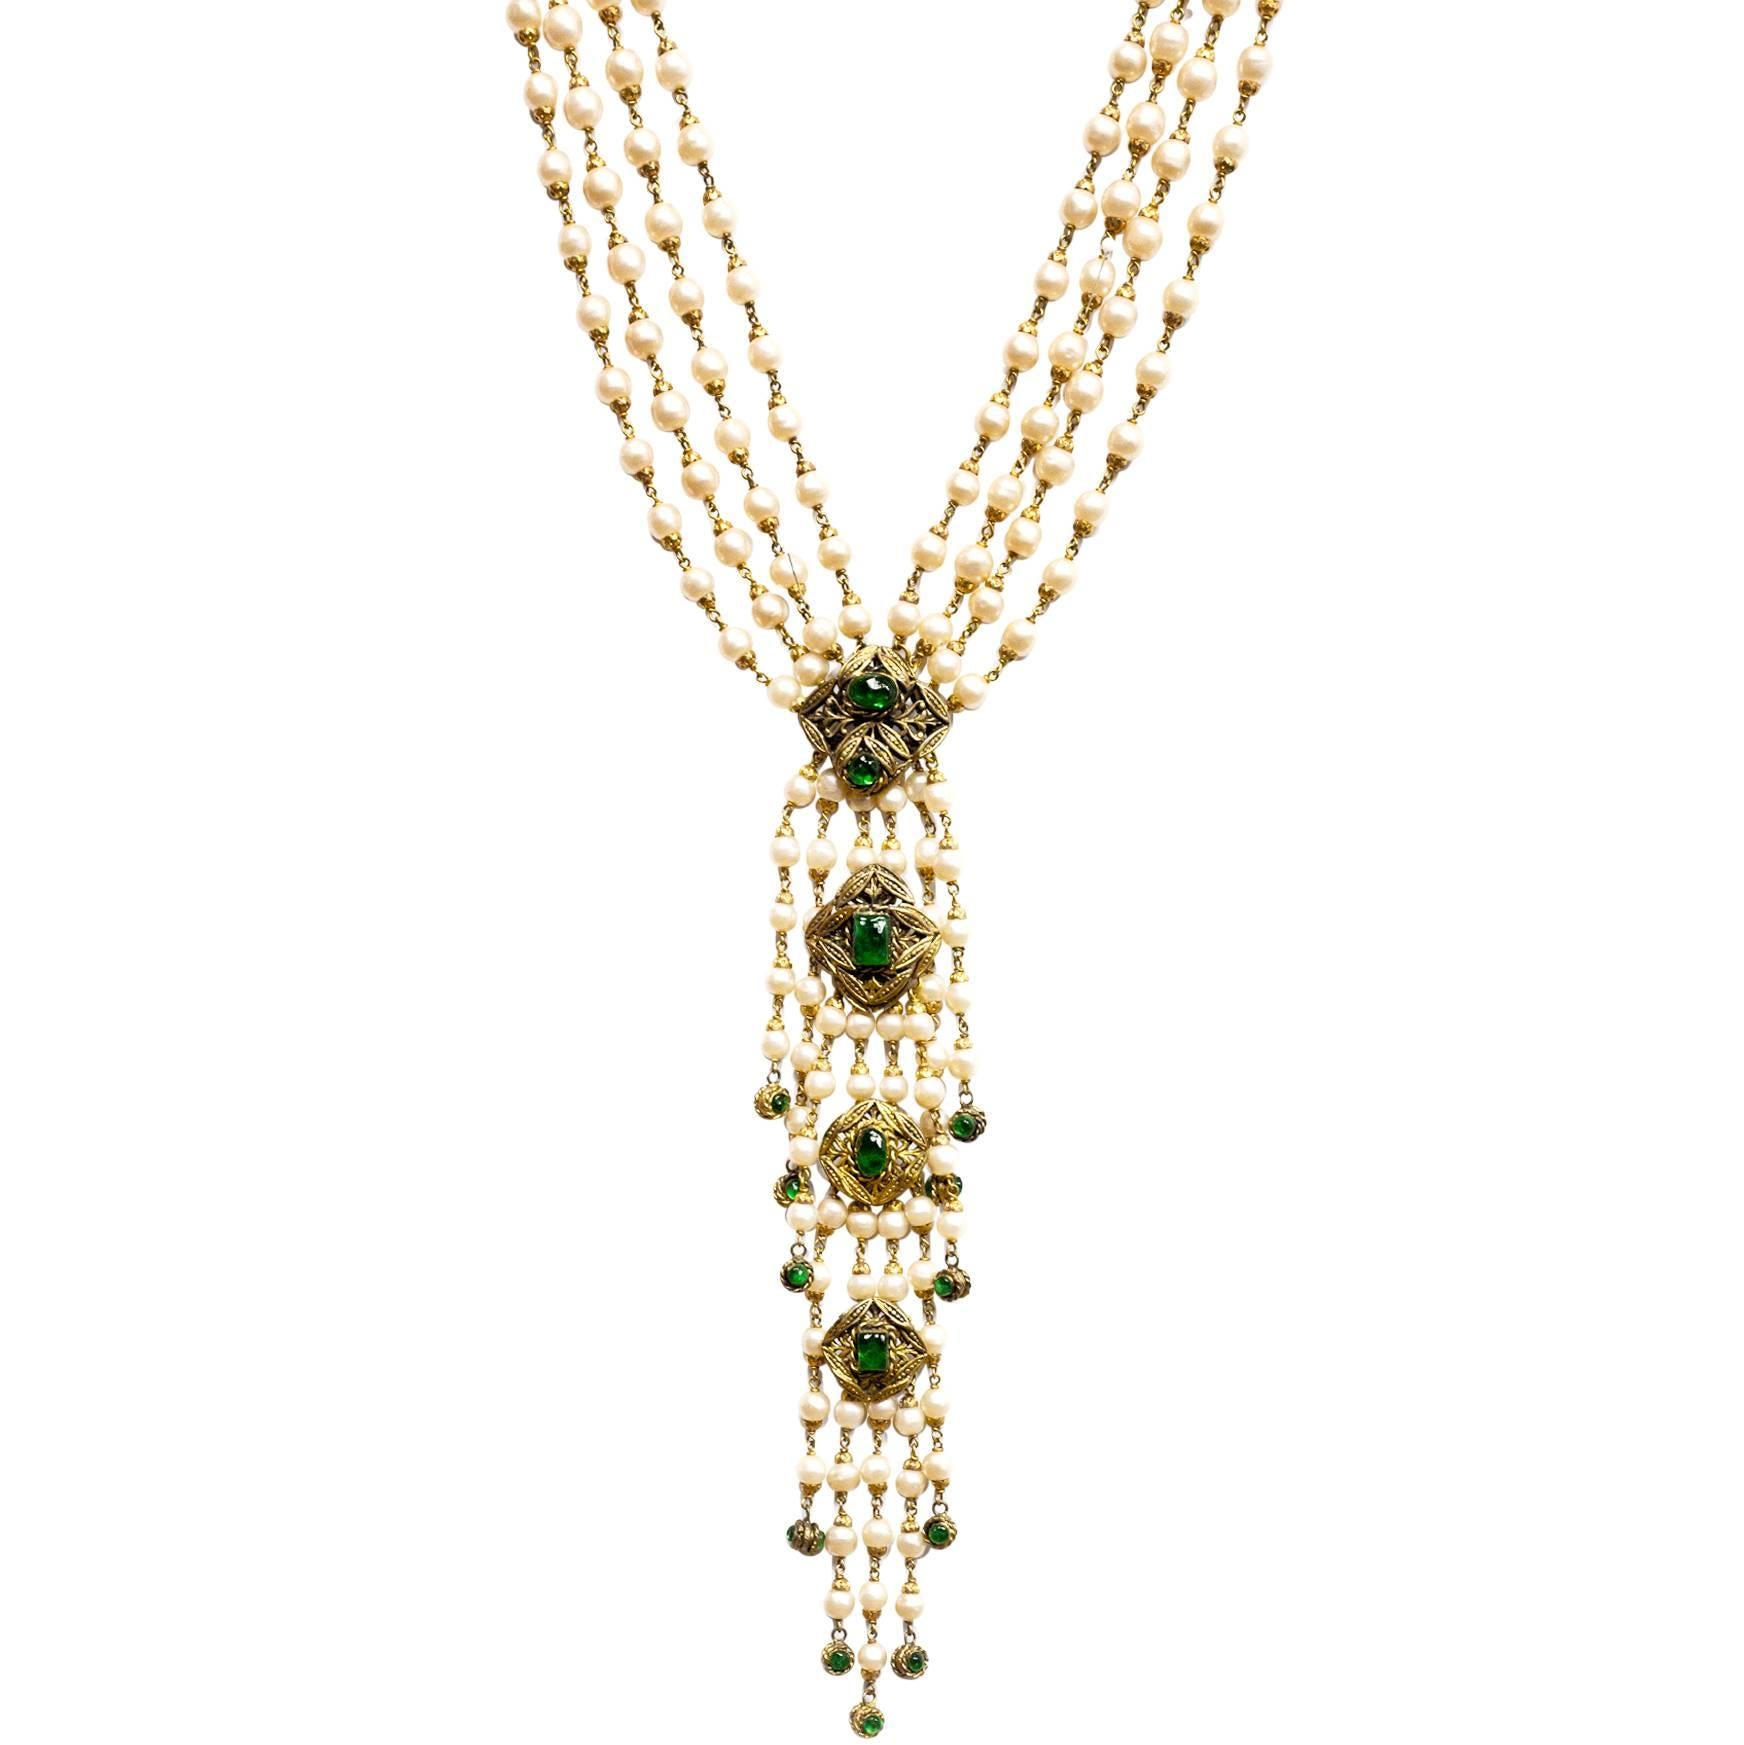 Chanel Vintage '70s Multi-Strand Pearl & Green Gripoix Drop Necklace